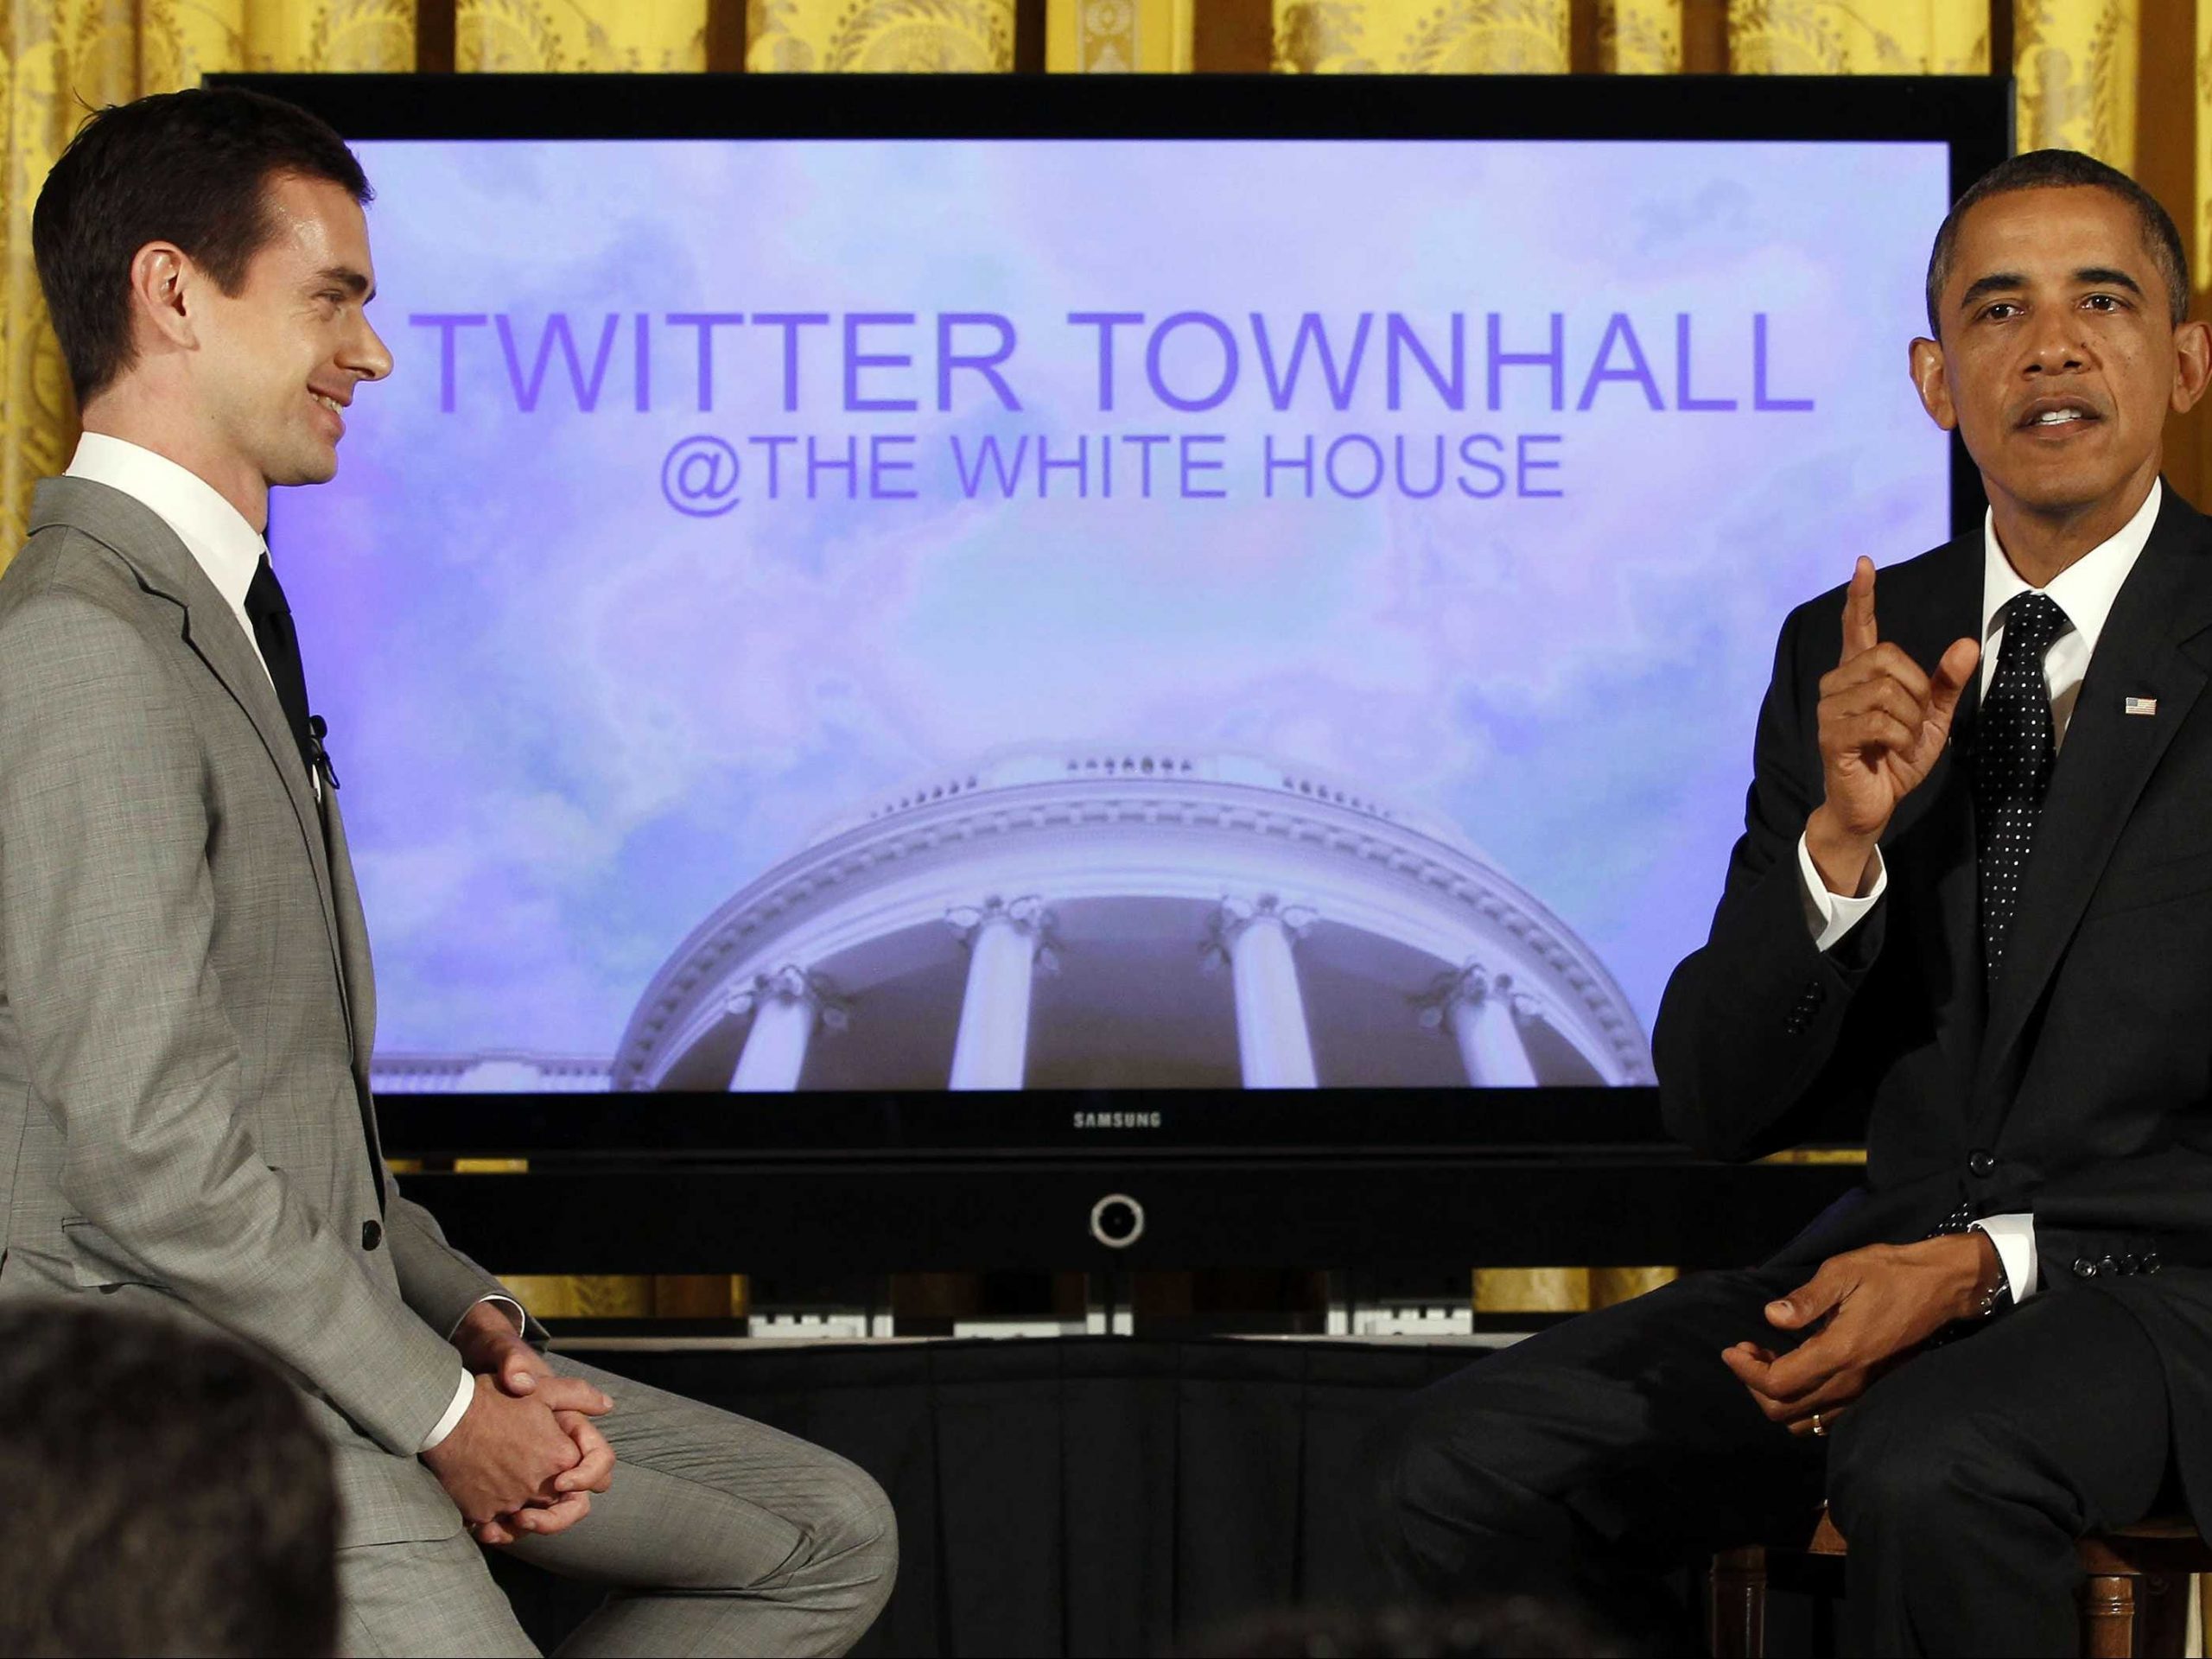 Jack Dorsey and President Obama in Twitter Town Hall